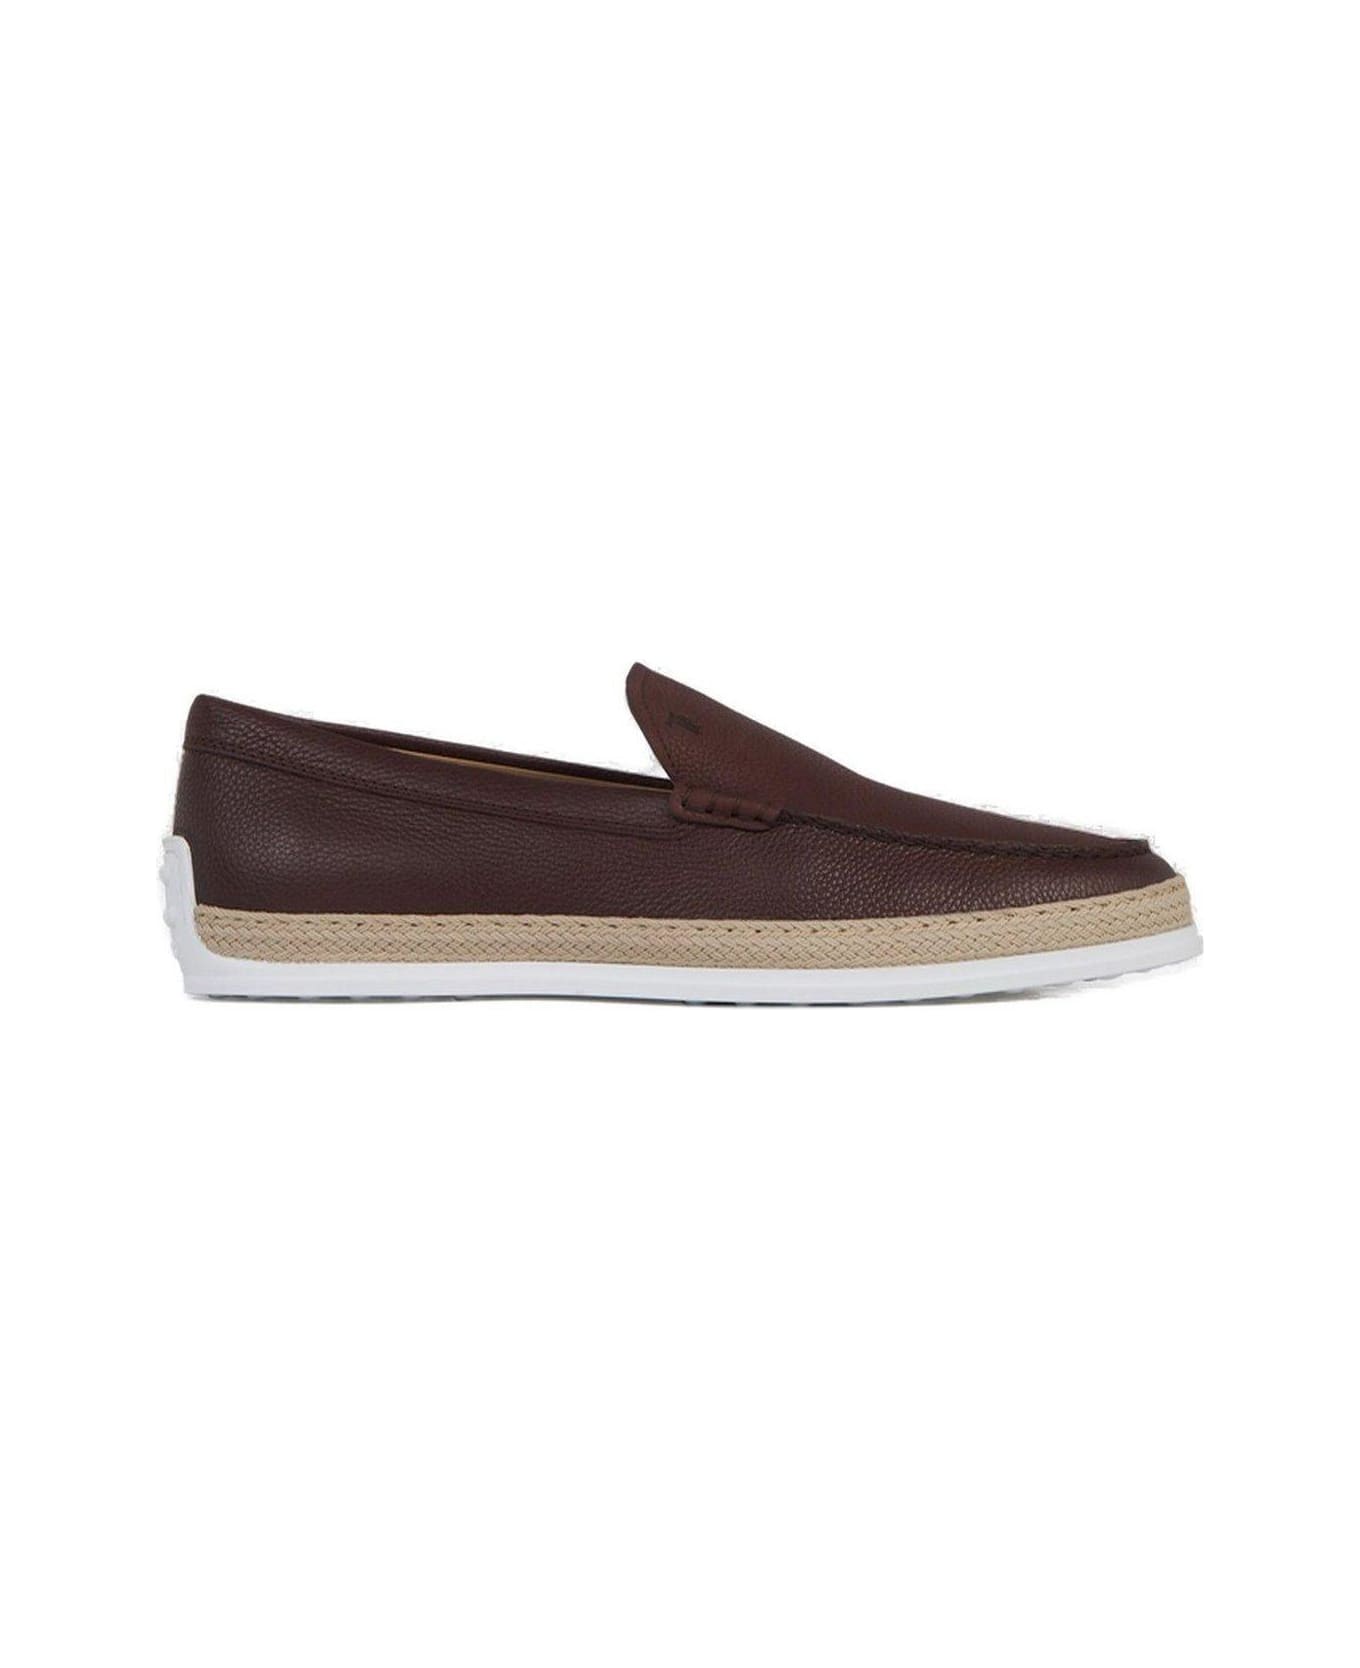 Tod's Round Toe Slip-on Loafers - BROWN